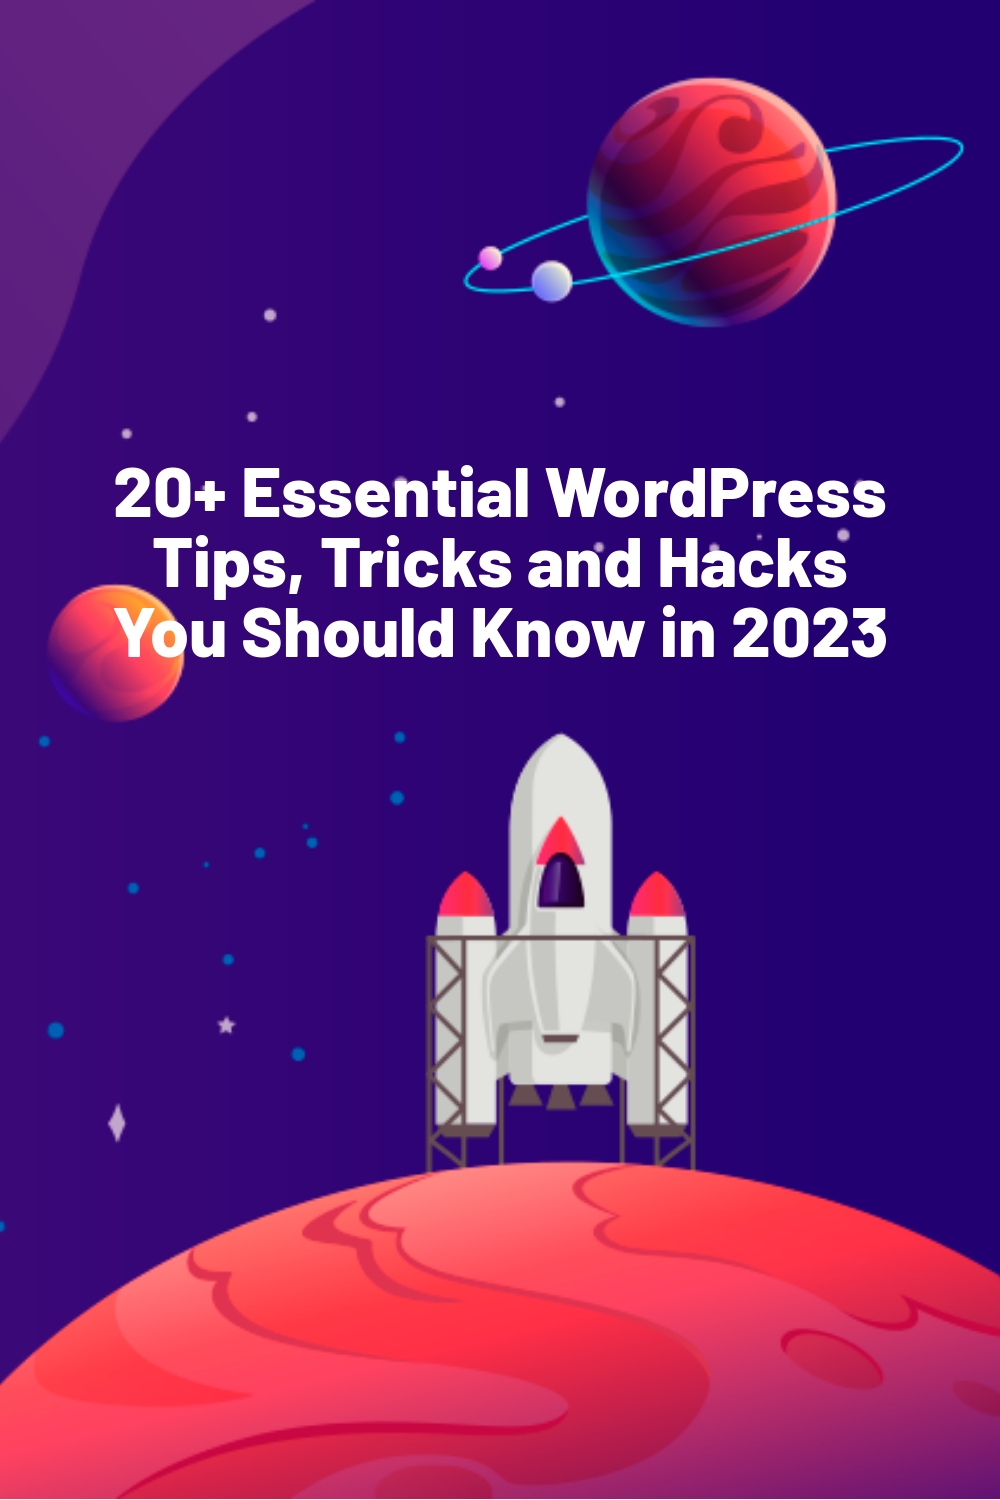 20+ Essential WordPress Tips, Tricks and Hacks You Should Know in 2023